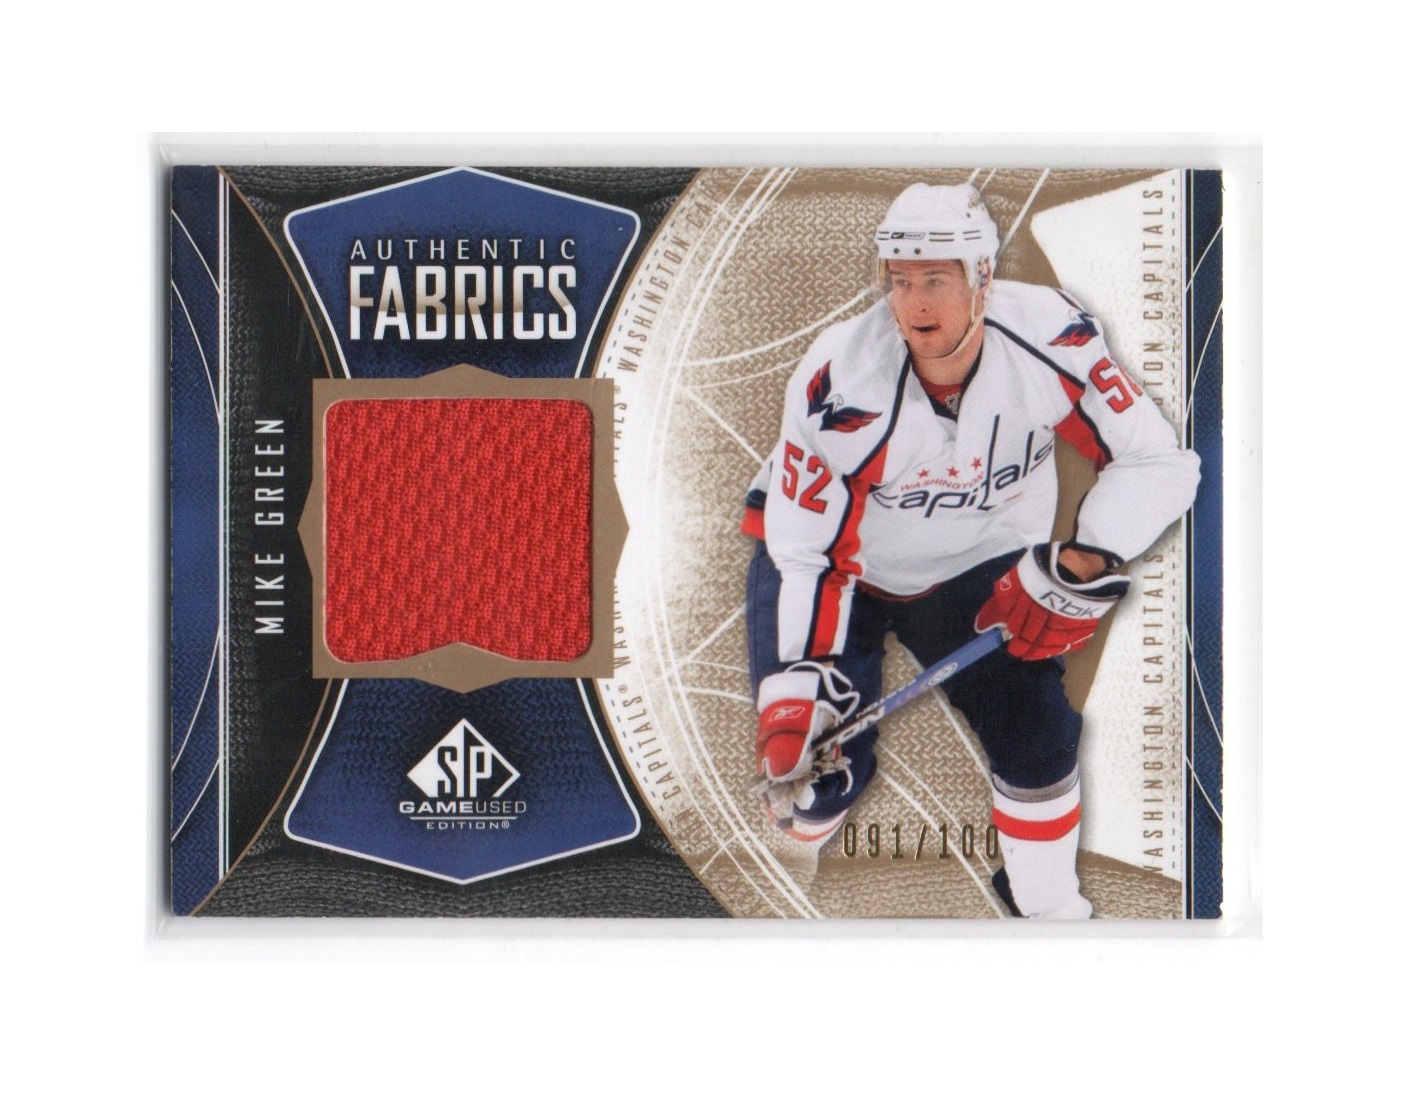 2009-10 SP Game Used Authentic Fabrics Gold #AFGR Mike Green (40-X252-CAPITALS)